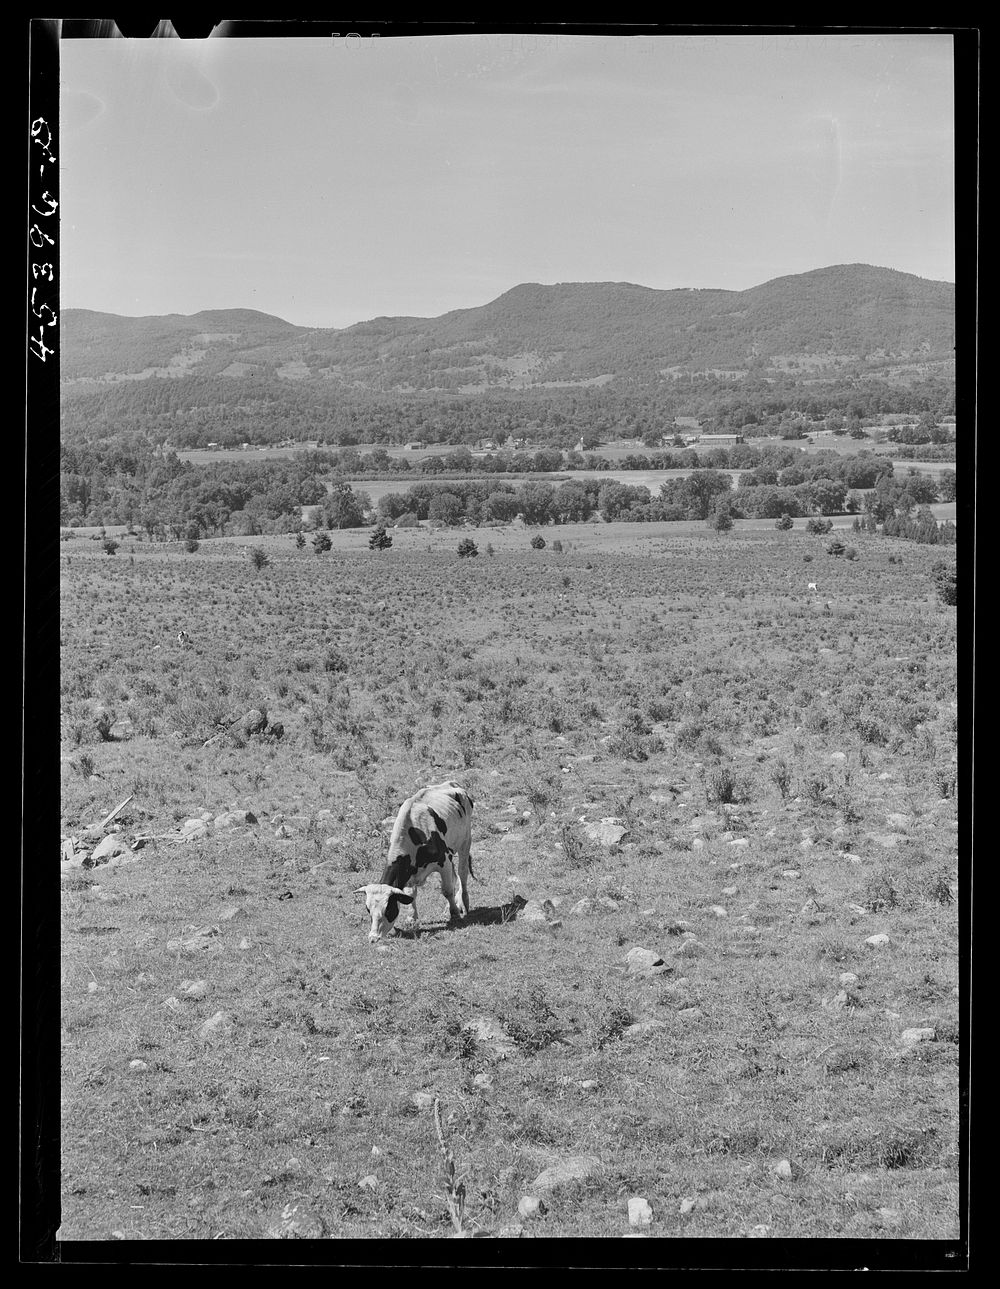 Rocky pasture near Brandon, Vermont. Sourced from the Library of Congress.